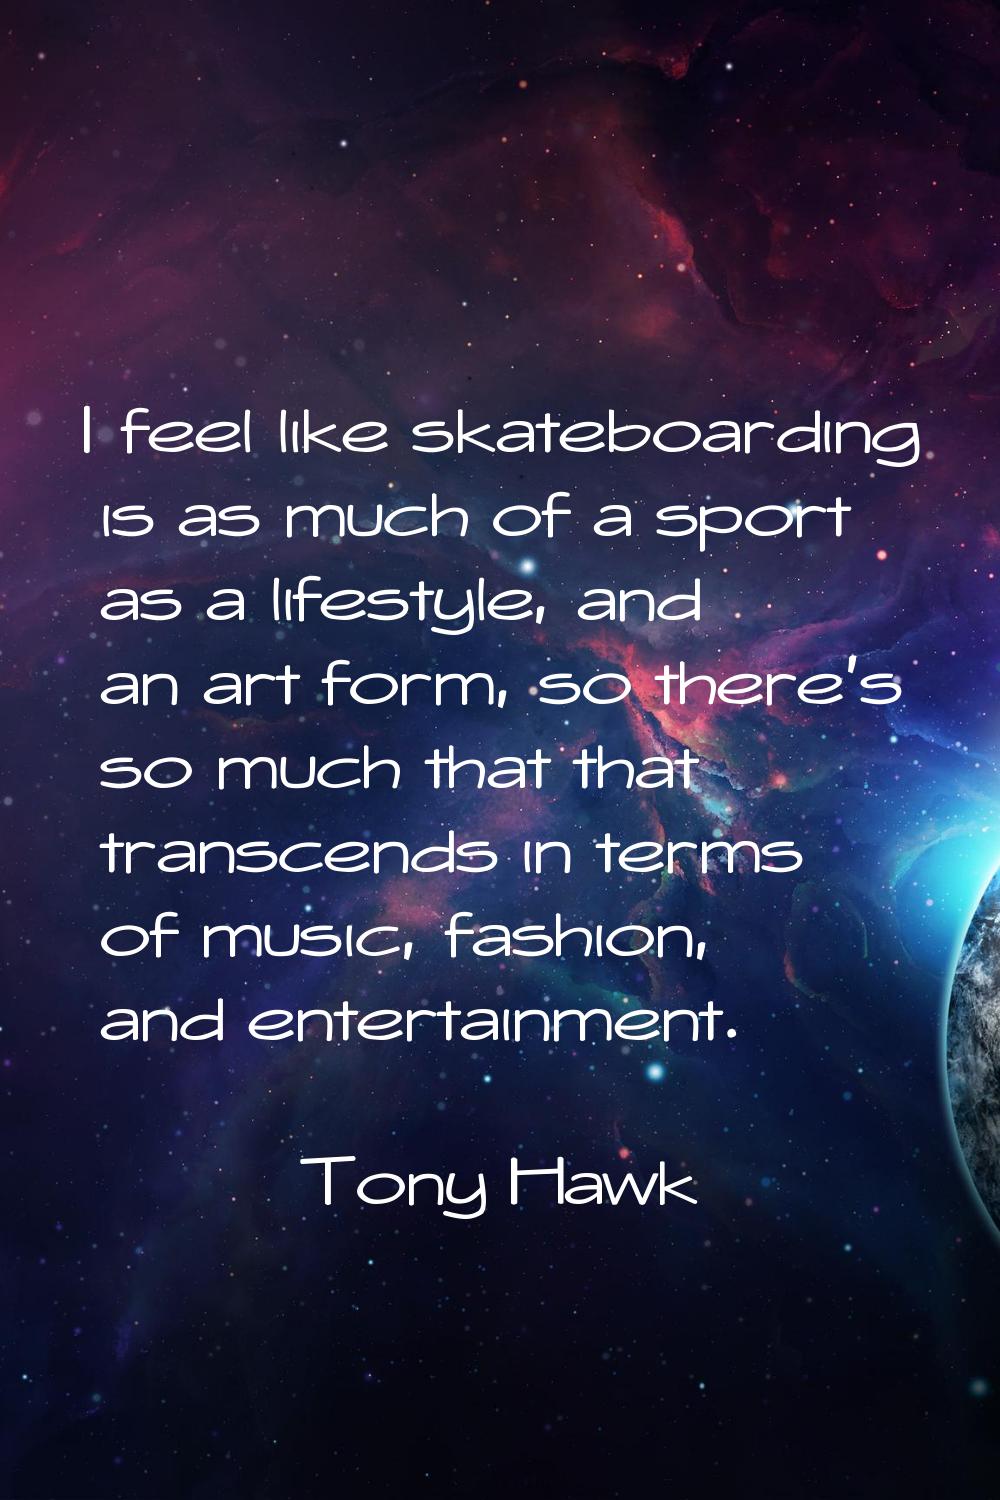 I feel like skateboarding is as much of a sport as a lifestyle, and an art form, so there's so much